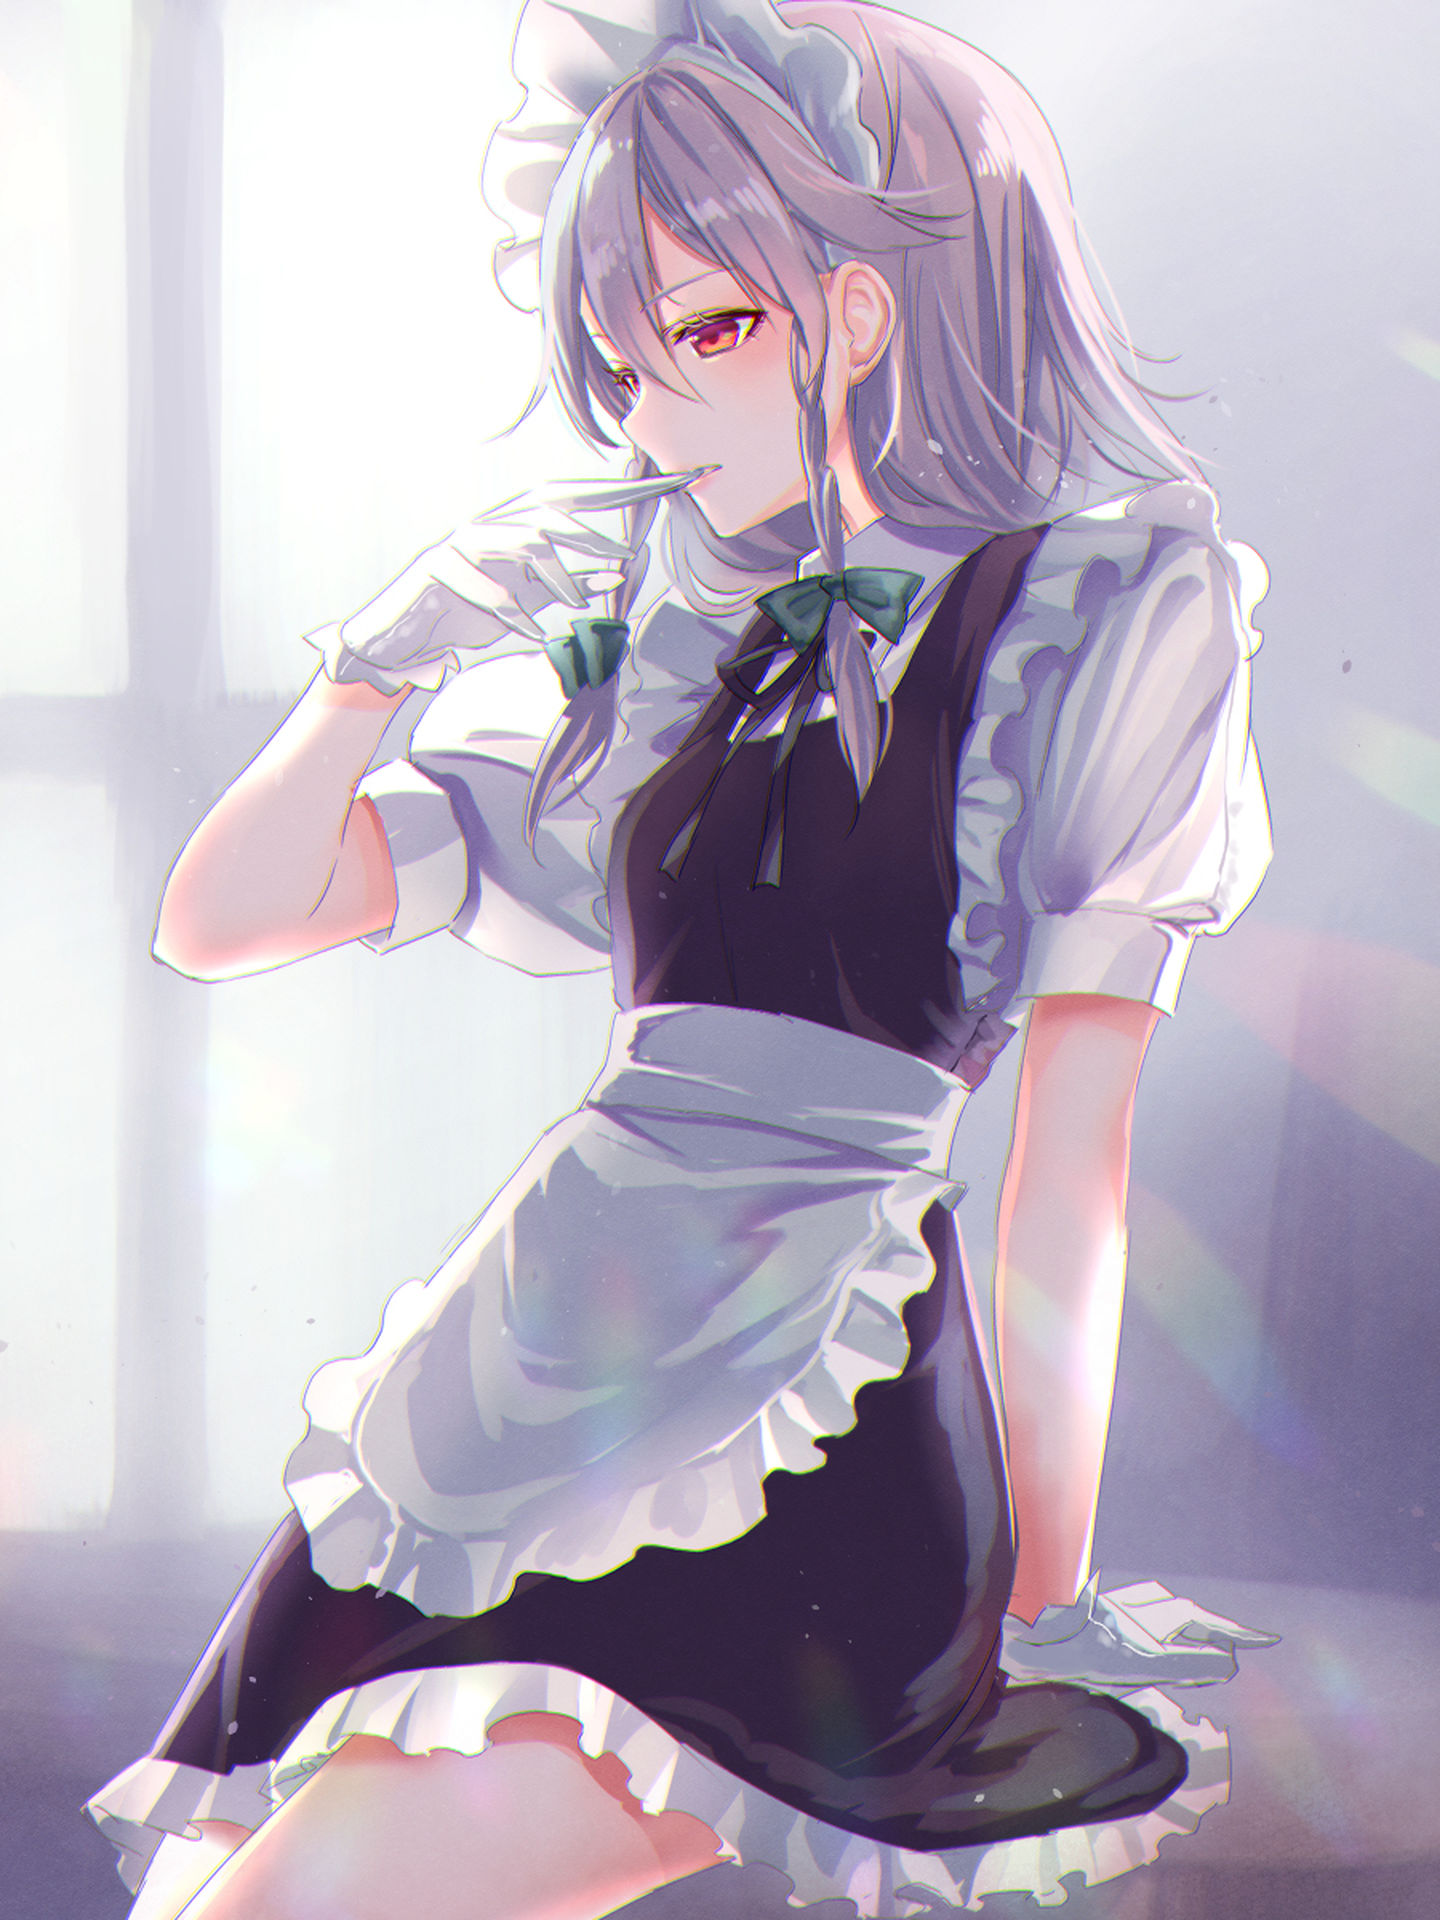 red eyes, purple hair, braids, anime, anime girls, maid outfit, Touhou